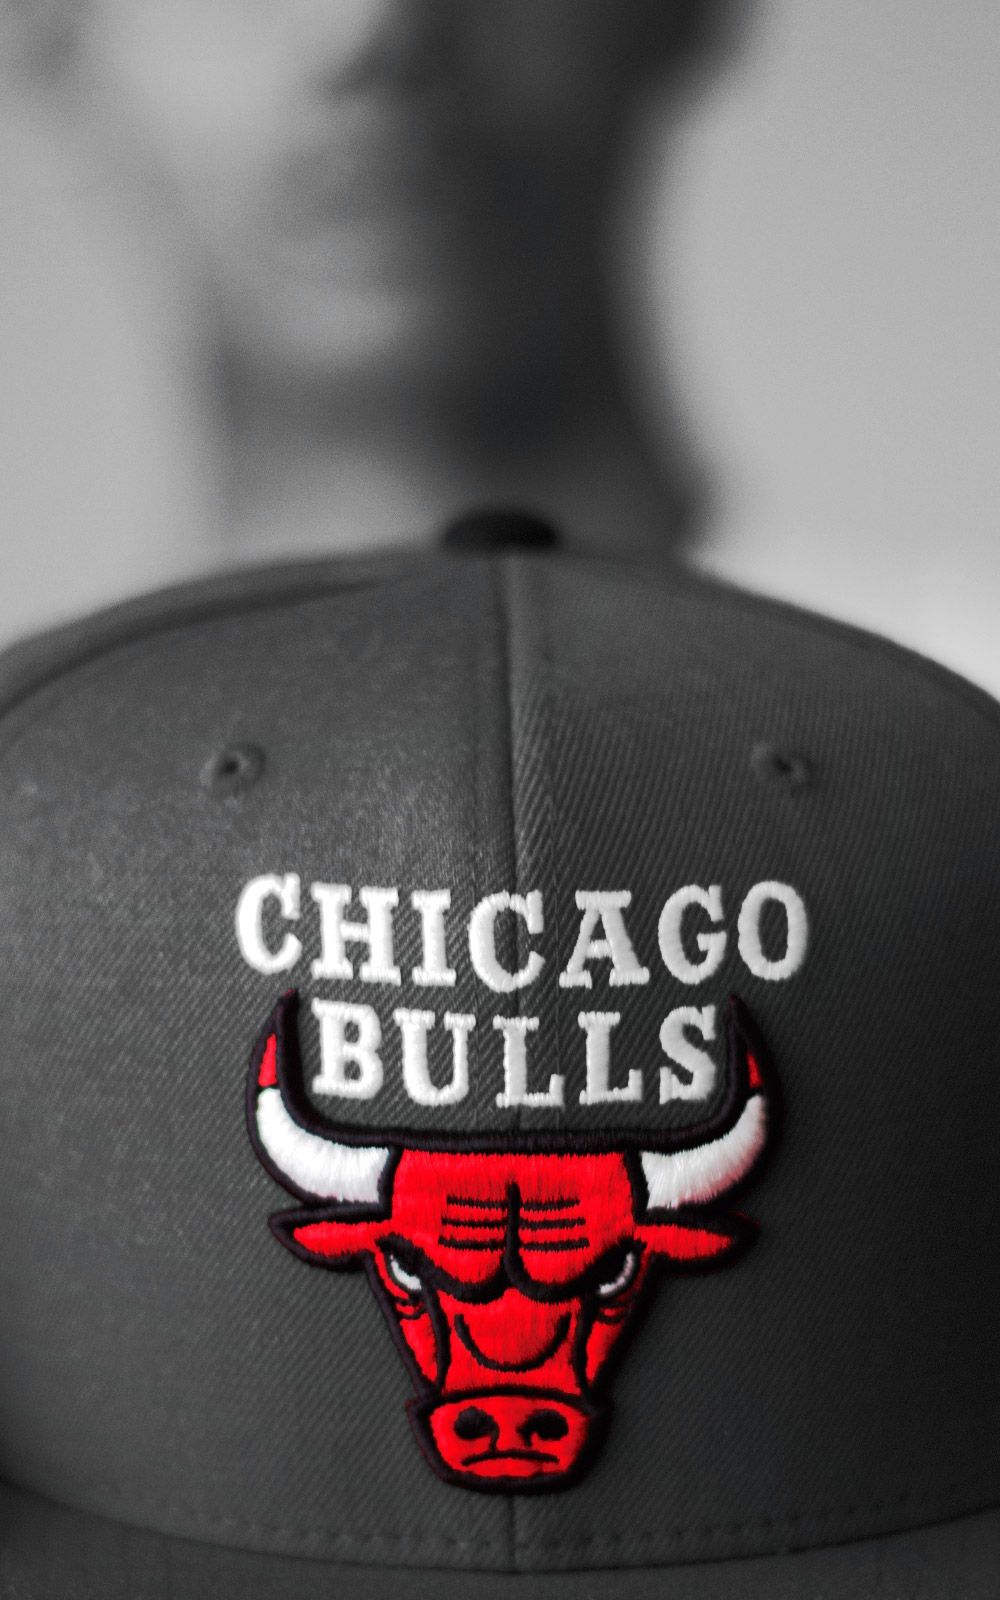 Chicago Bulls Wallpaper For Iphone Iphone Wallpaper - Chicago Bulls Wallpaper Hd Iphone , HD Wallpaper & Backgrounds